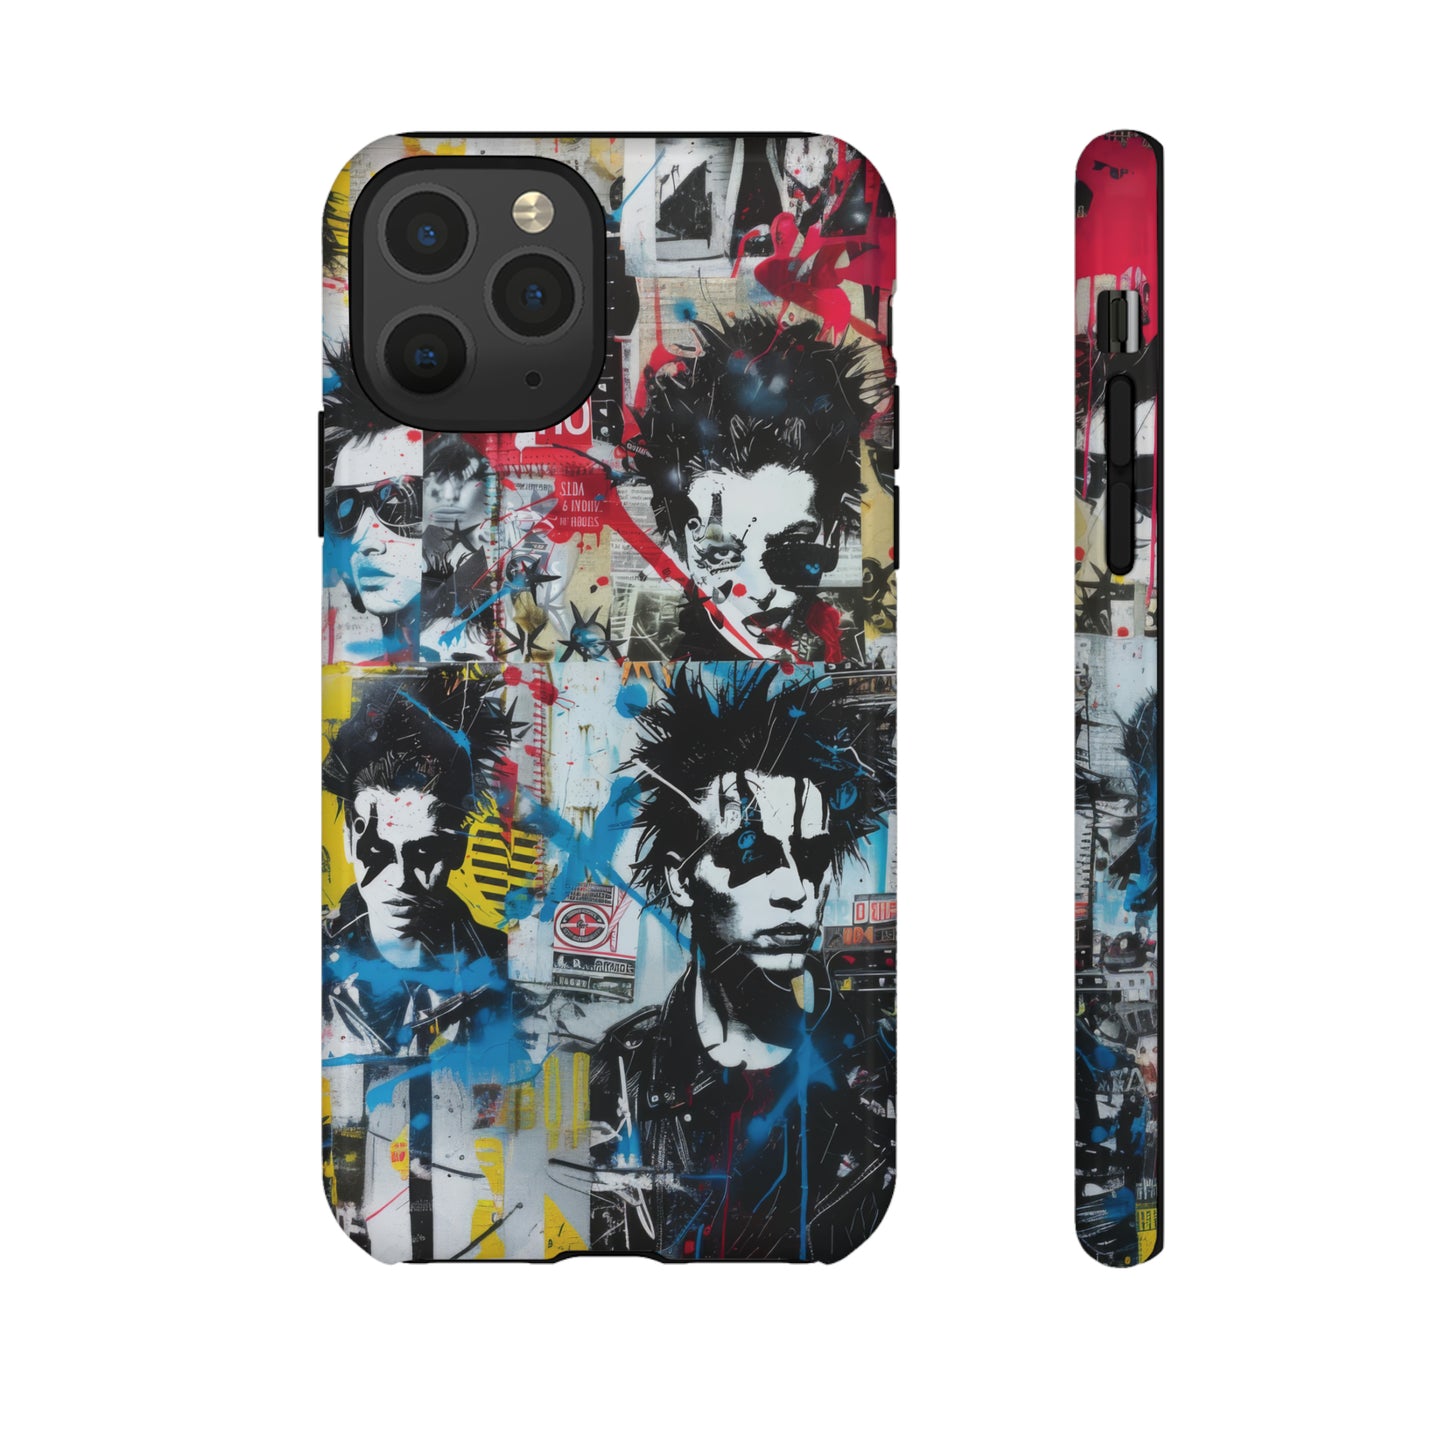 Urban Punk Graffiti Art Phone Case, Durable Protective Cover for Latest Models, Eye-Catching Street Style Accessory, Tough Cases